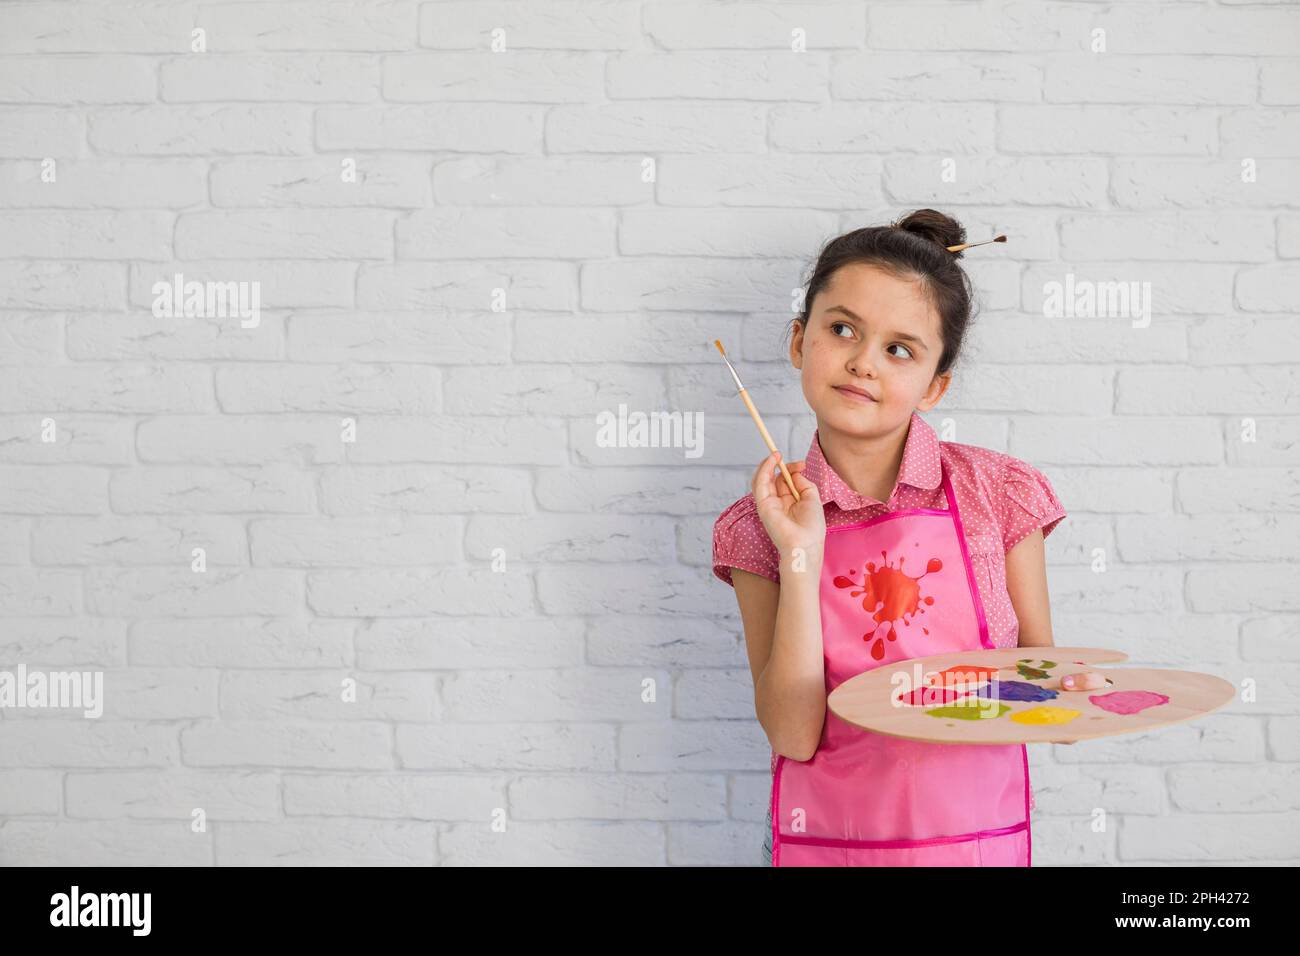 Portrait girl with paintbrush palette standing against white wall Stock Photo